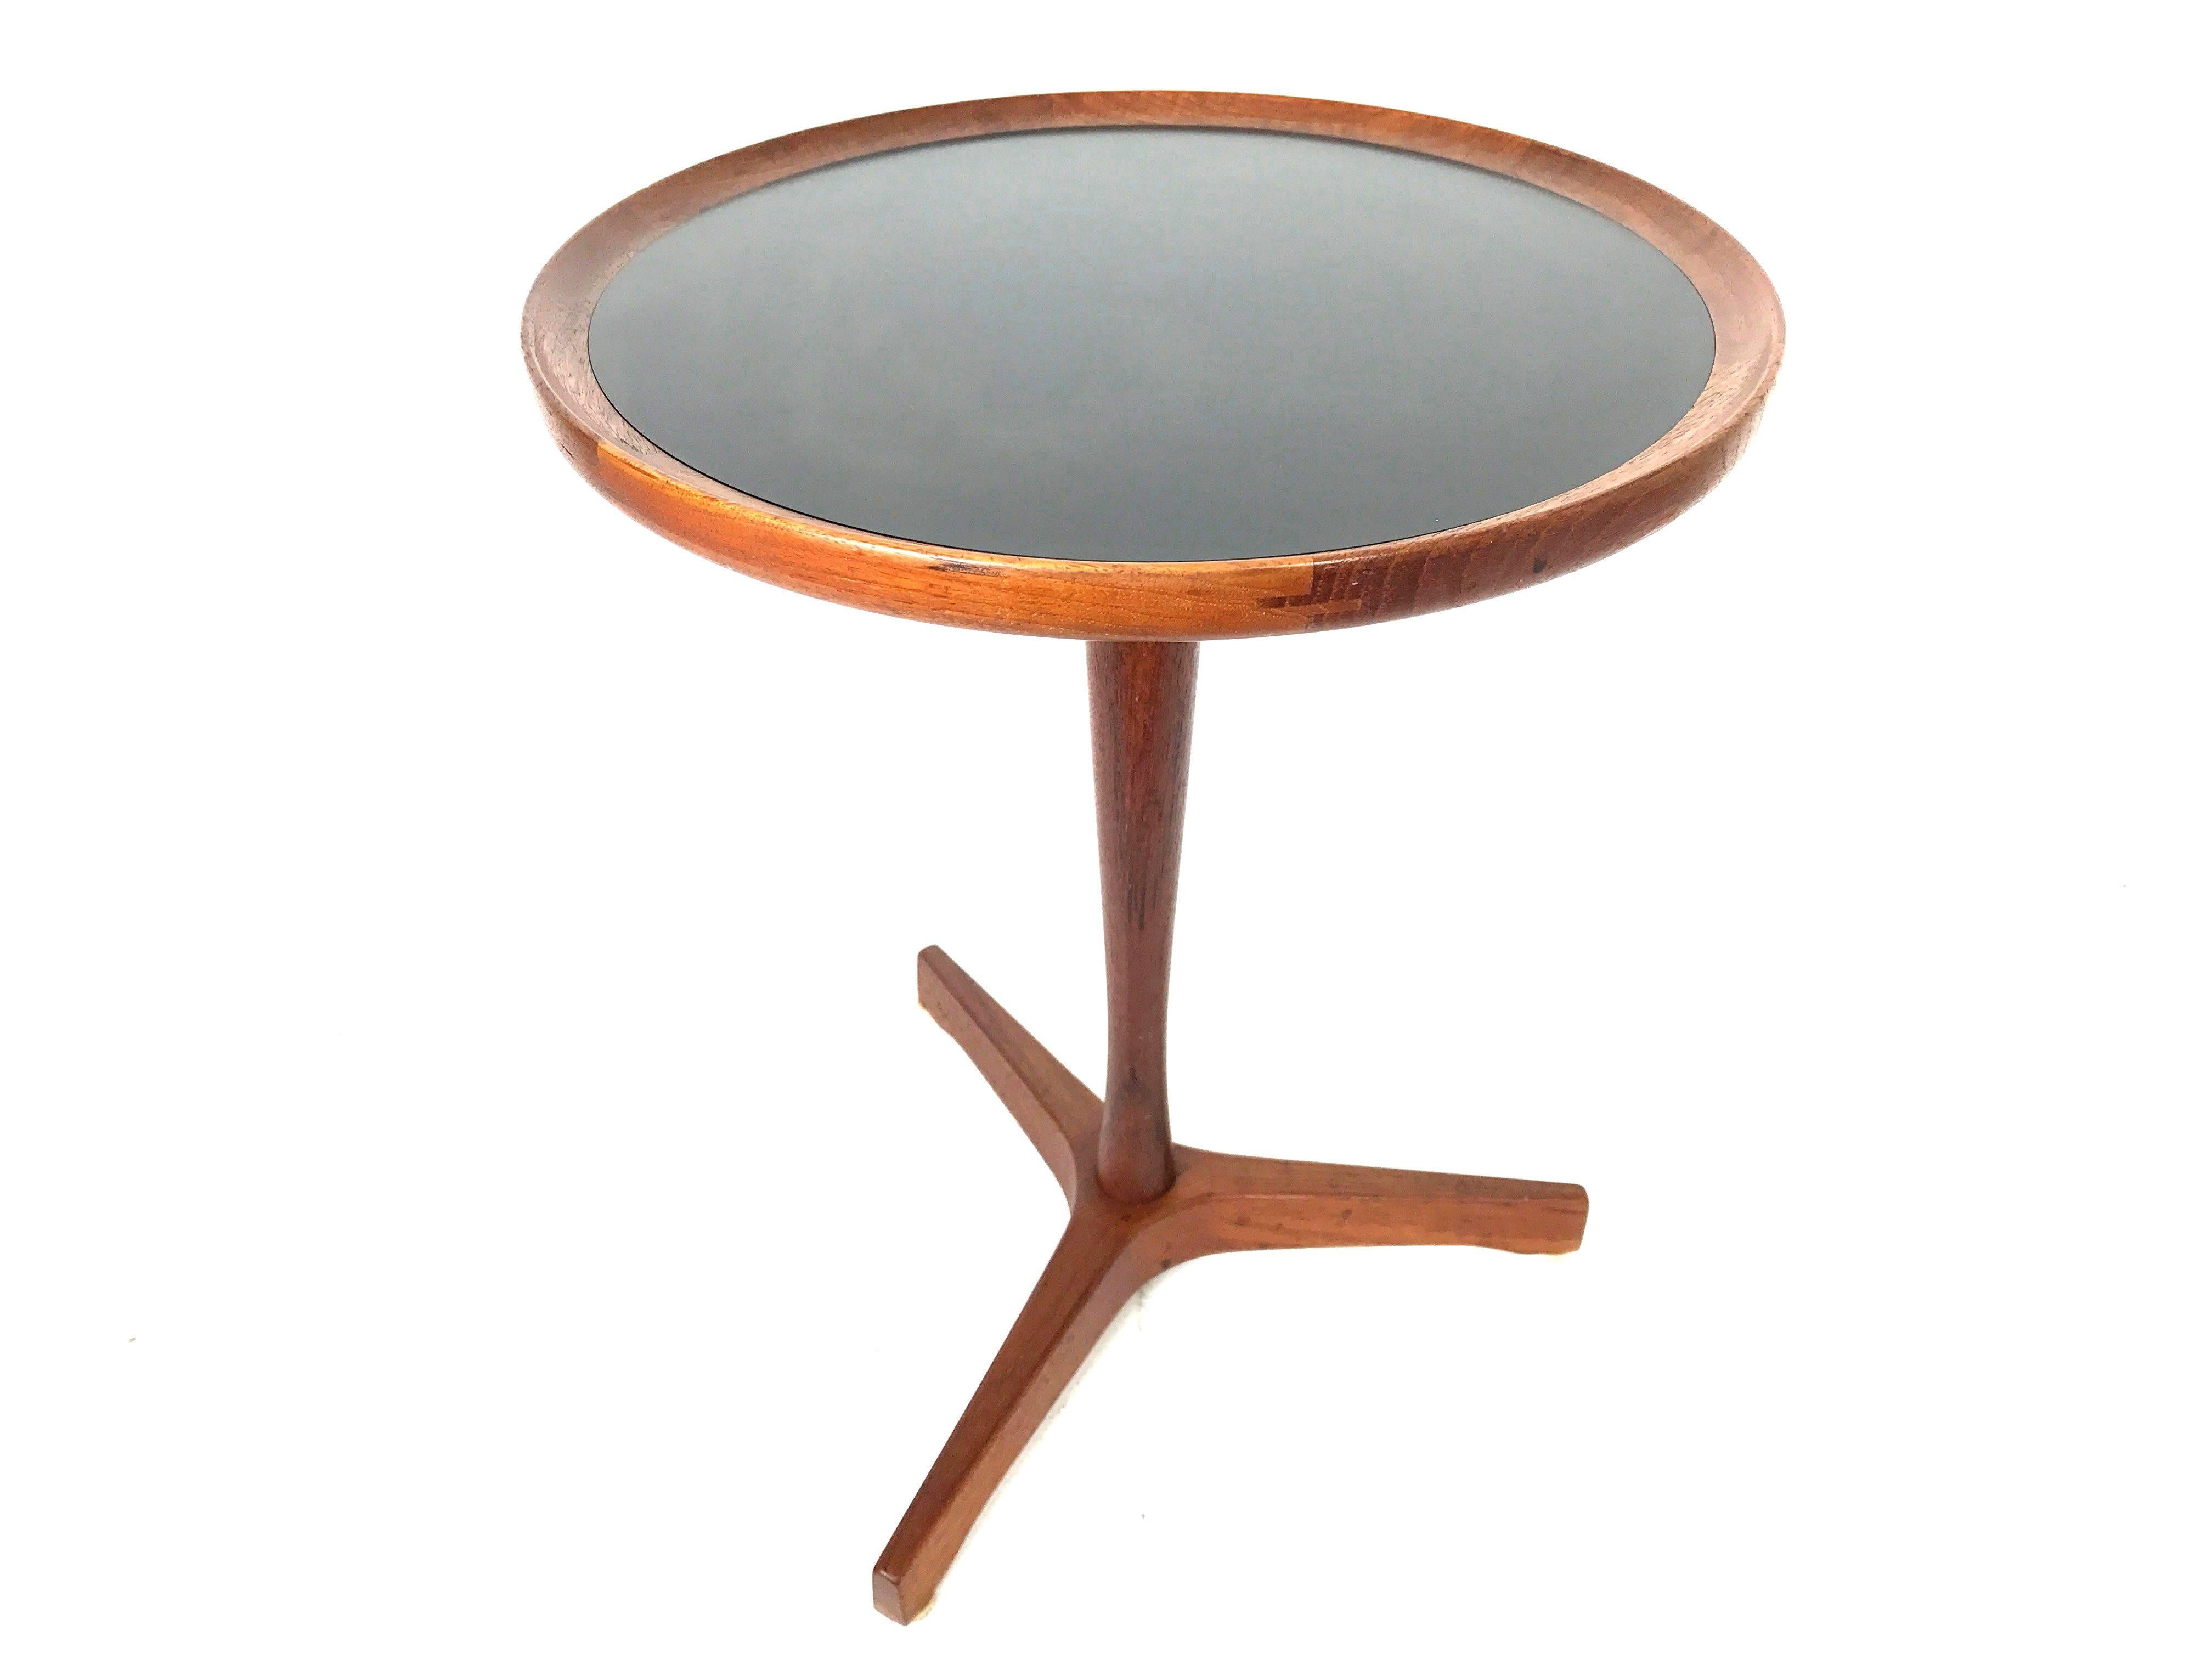 Hans Andersen side table, Denmark, 1950s. Beautiful Mid-Century simplicity. 
Signed and in mint condition. Teak wood with black veneer inlay and tripod base. 

Measures: 18" tall x 14.5" diameter.

 